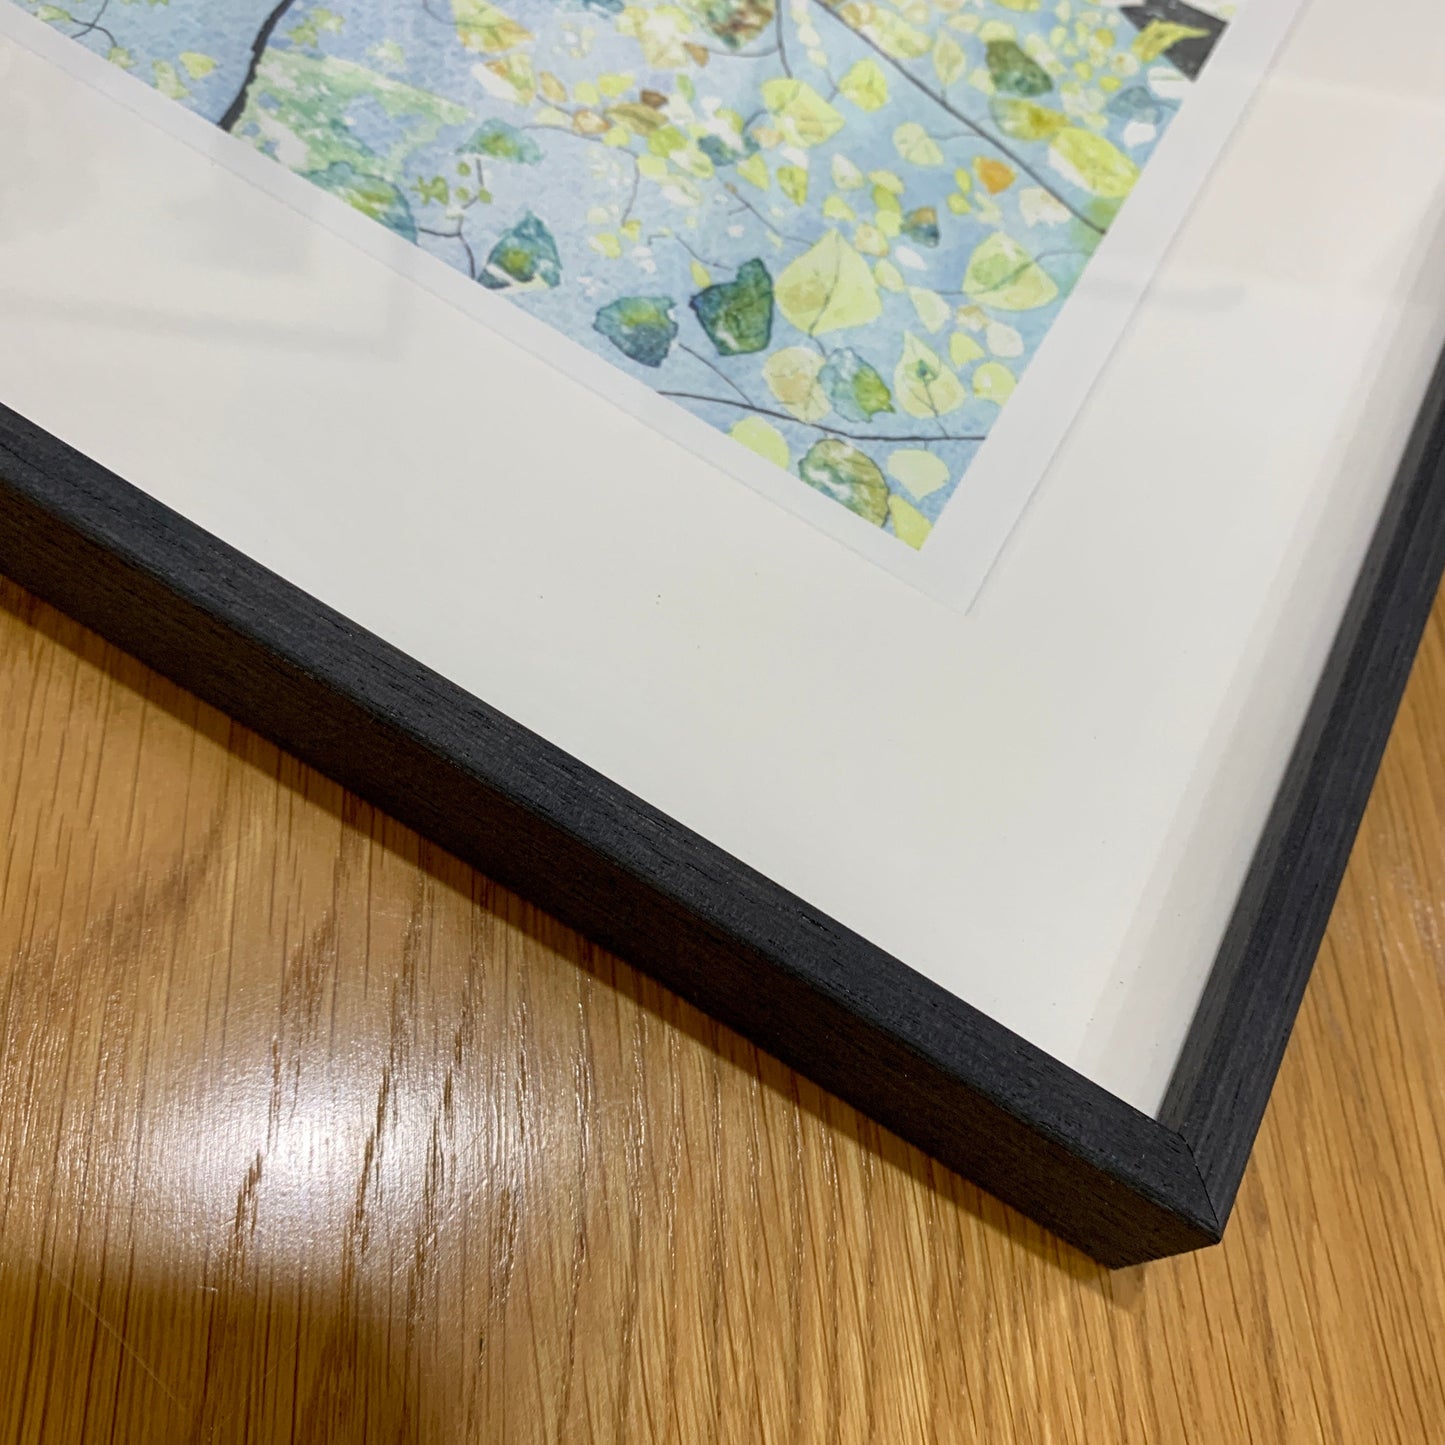 A4 | A3 Print - Dandelions and Birches (Limited Edition No. 195)